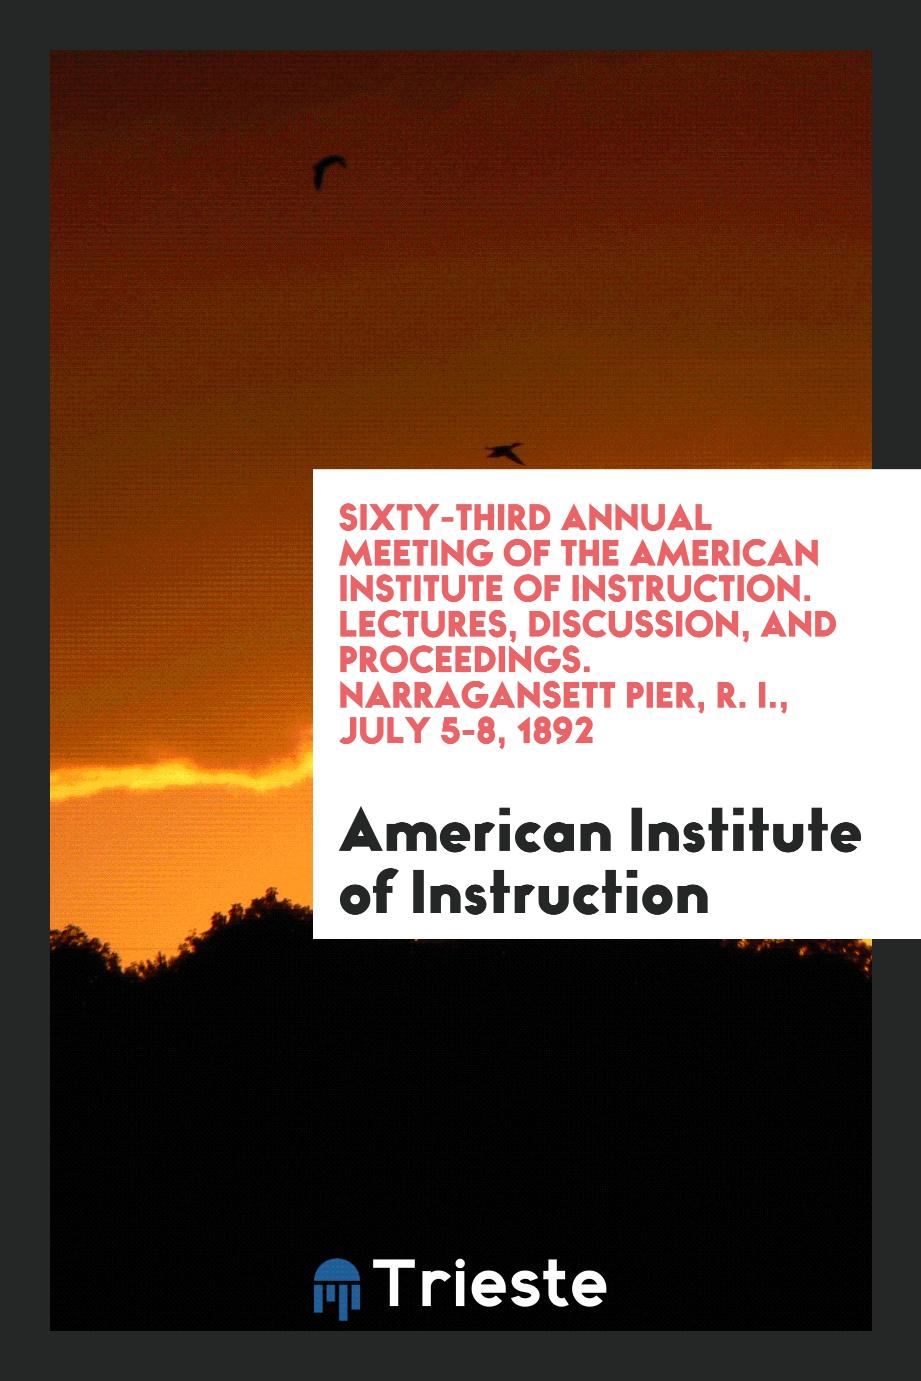 Sixty-Third Annual Meeting of the American Institute of Instruction. Lectures, Discussion, and Proceedings. Narragansett Pier, R. I., July 5-8, 1892